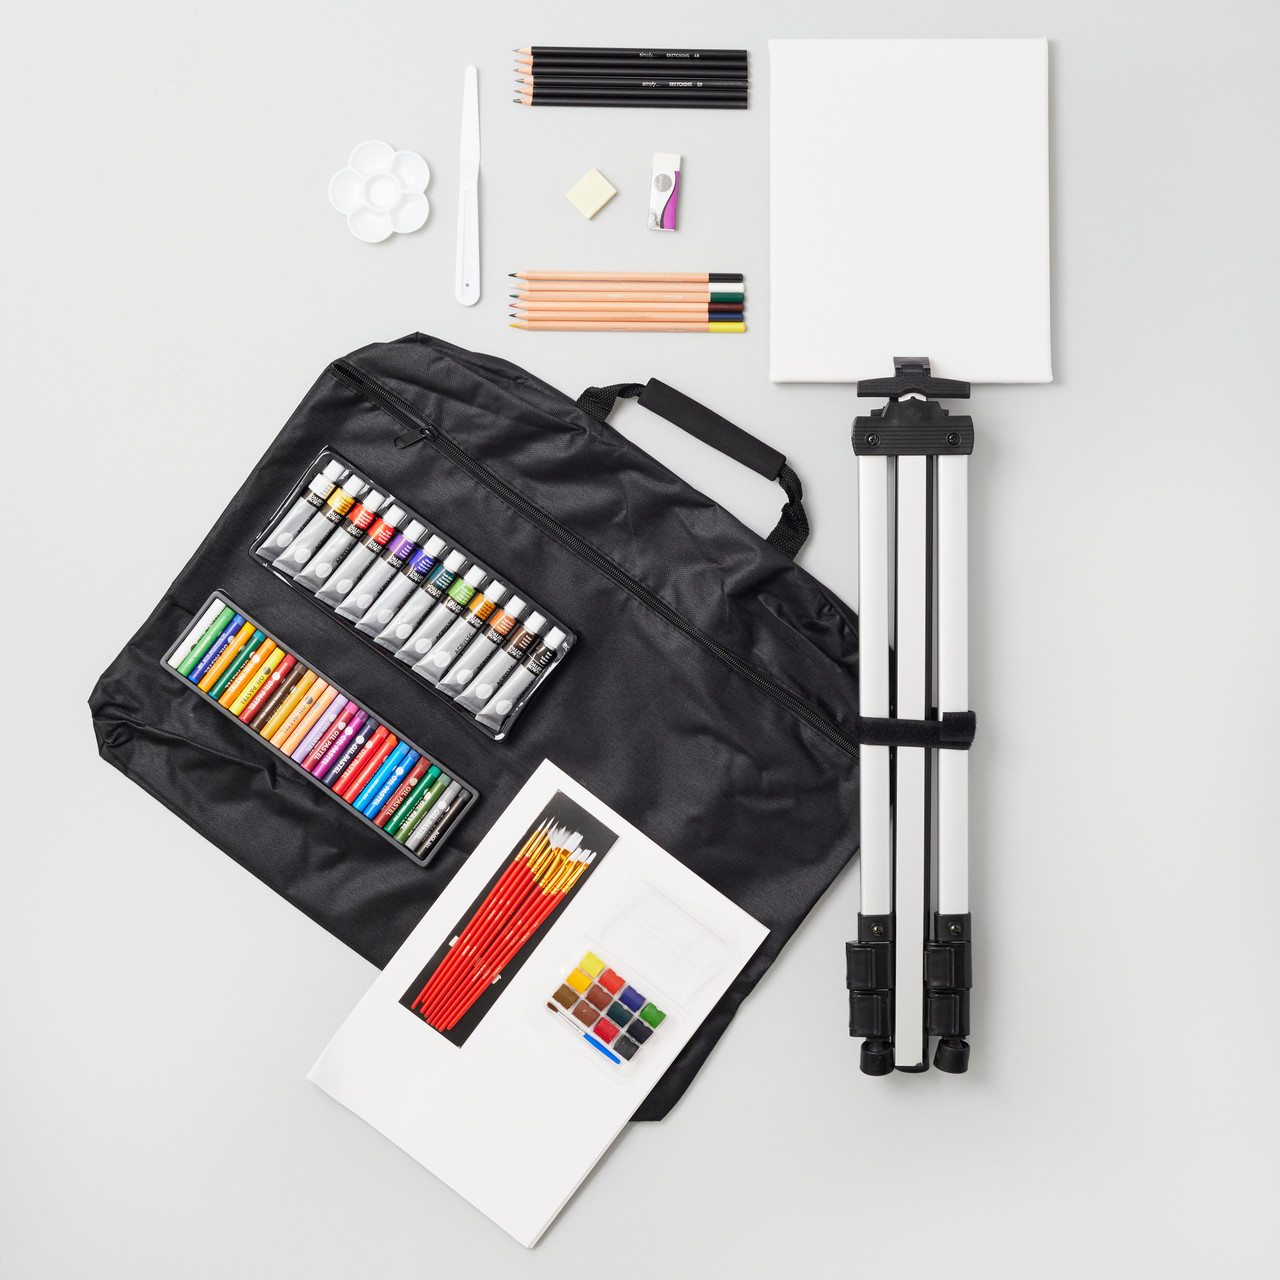 SIMPLY artistic set Complete Art easel studio set with easel 115